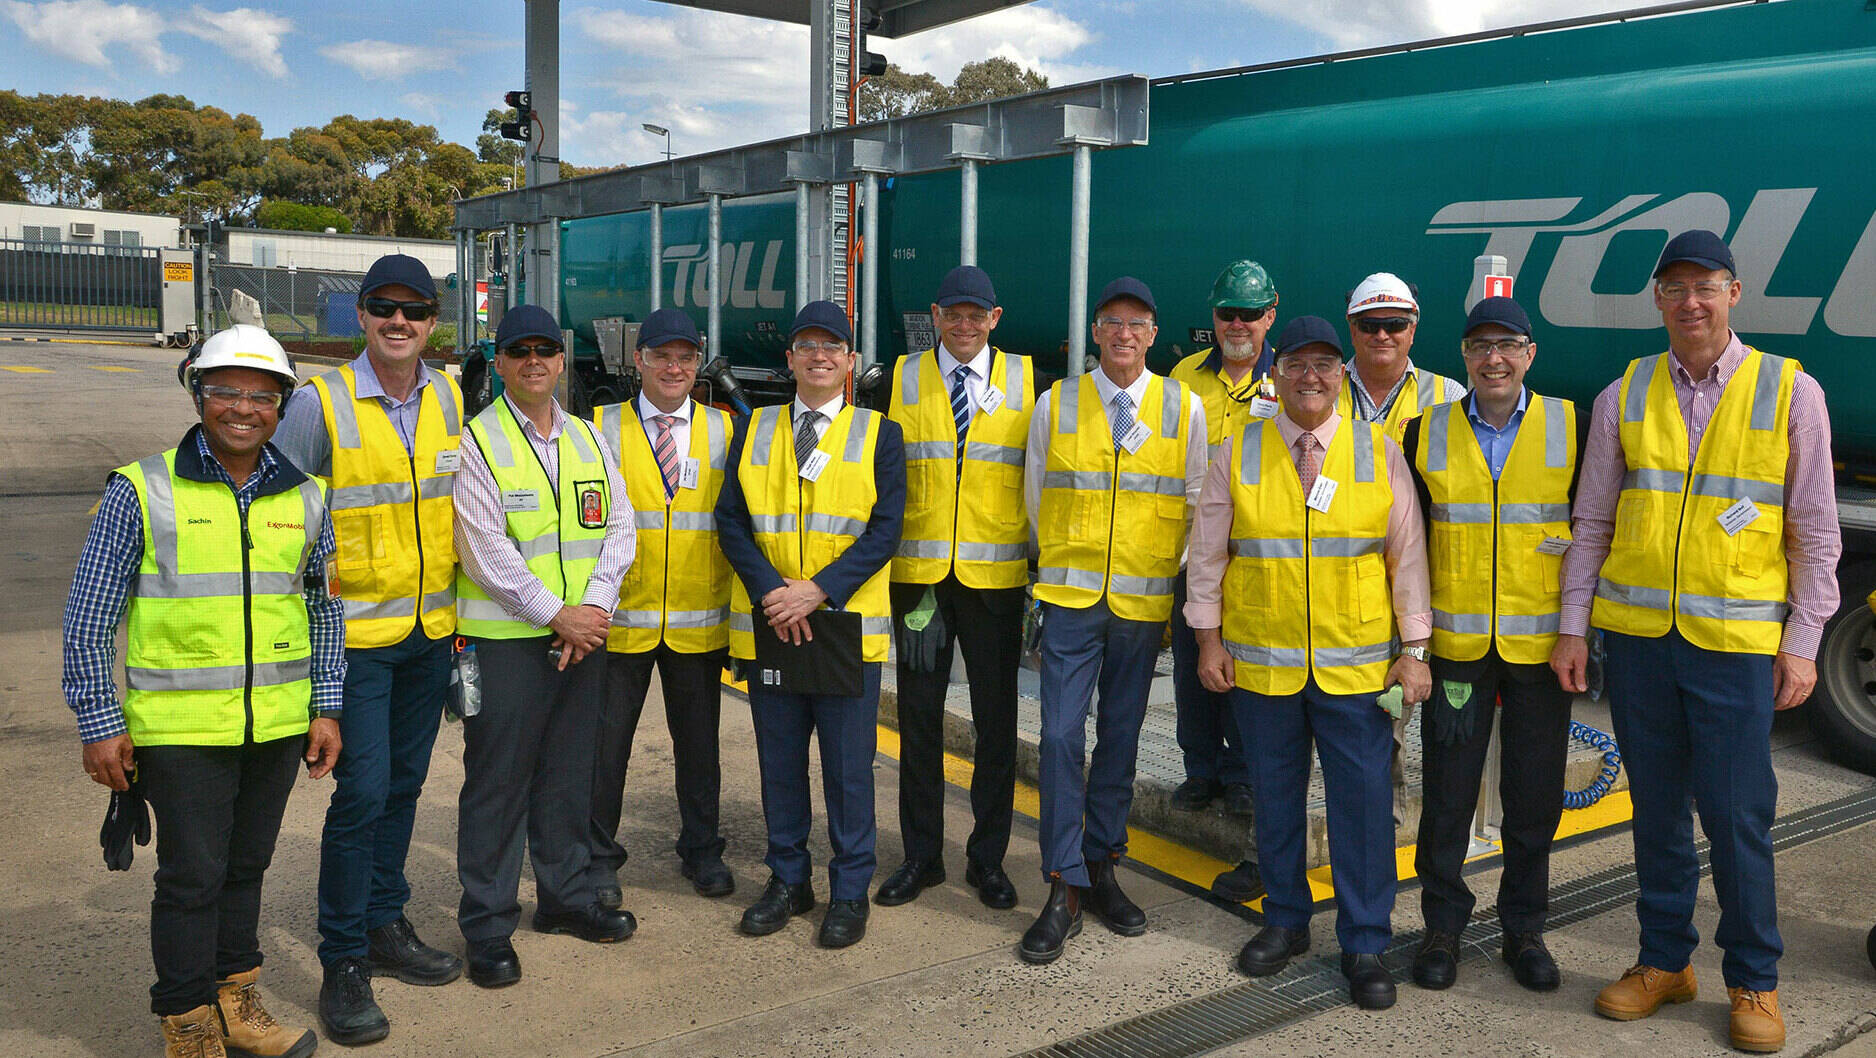 Image Photo— Industry stakeholders with Victorian Tourism Minister John Eren (pictured fourth from right) at the new truck unloading facility.